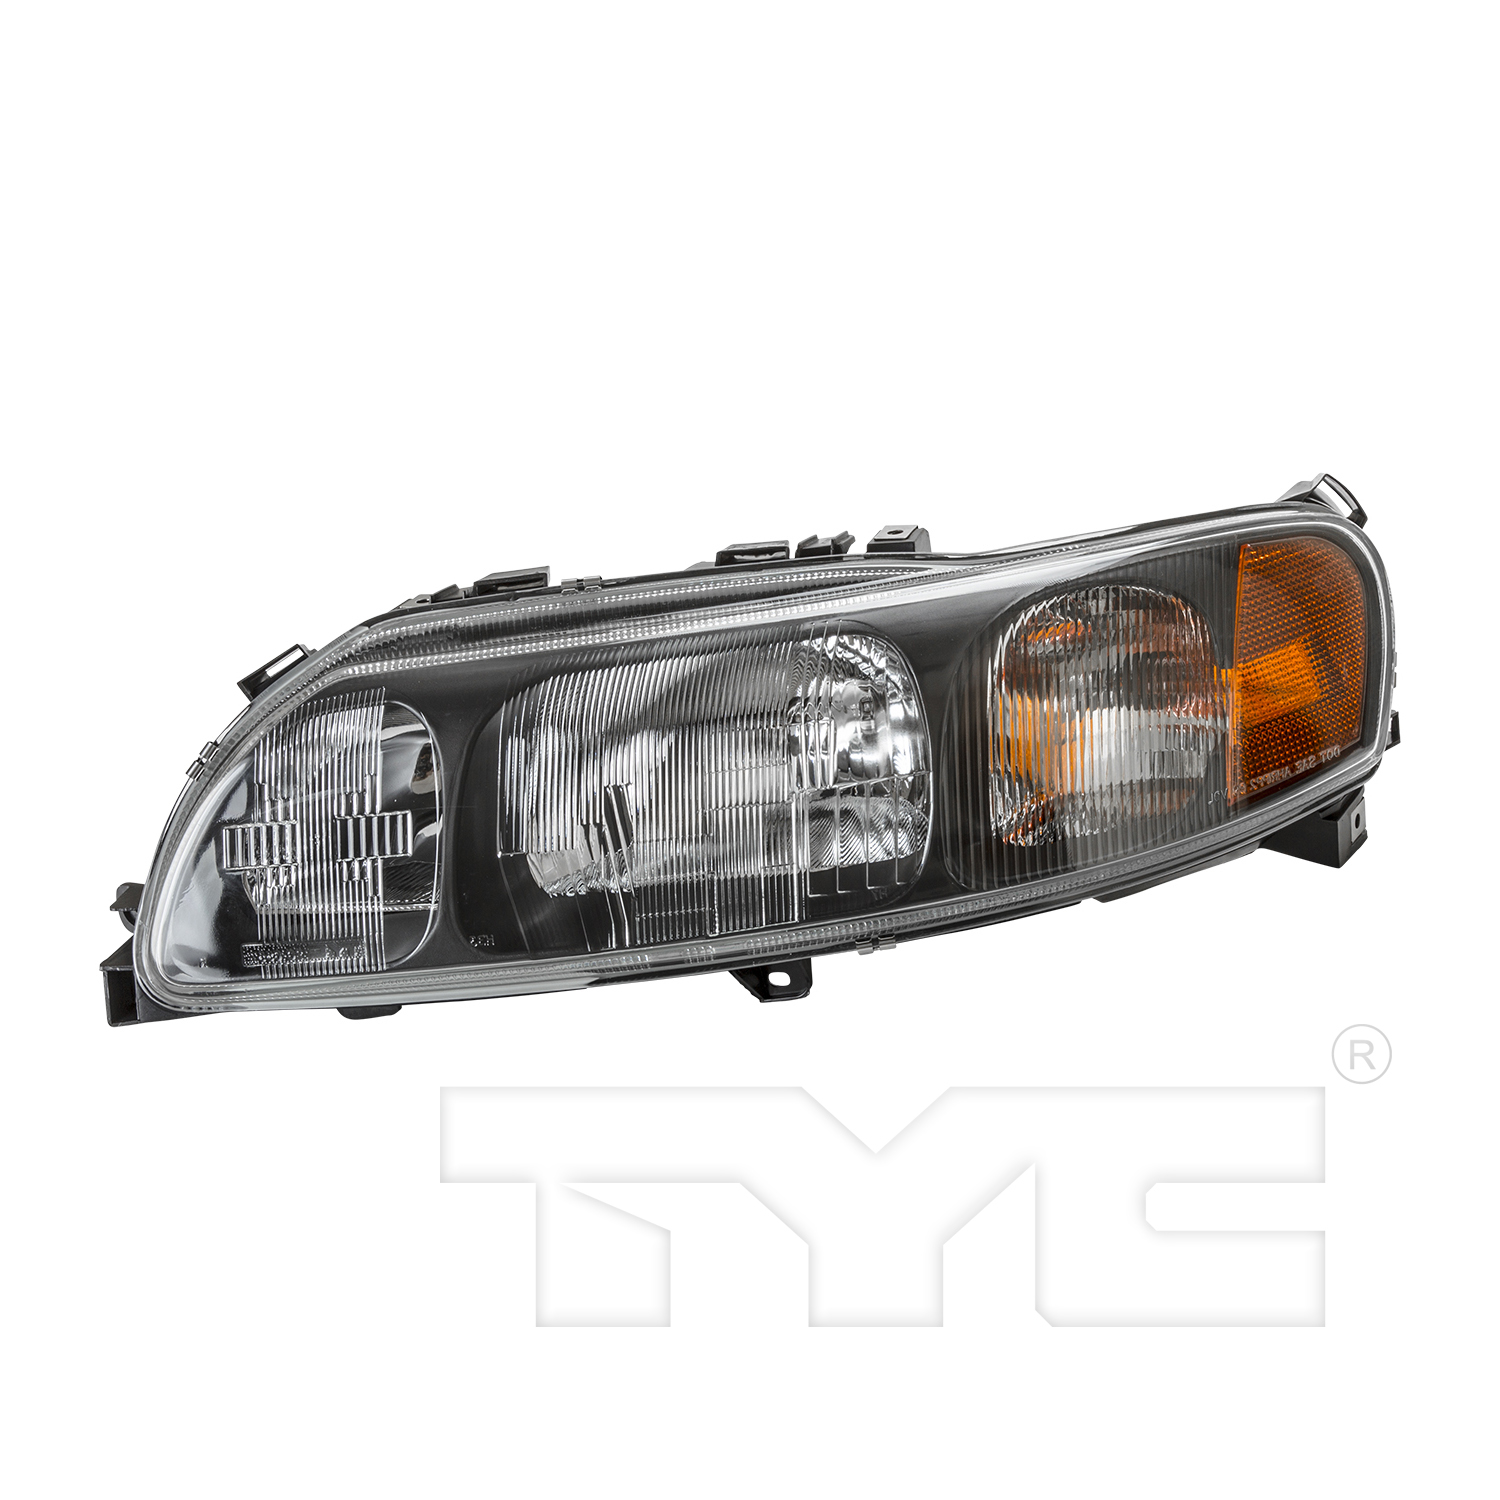 Aftermarket HEADLIGHTS for VOLVO - S60, S60,01-04,LT Headlamp assy composite